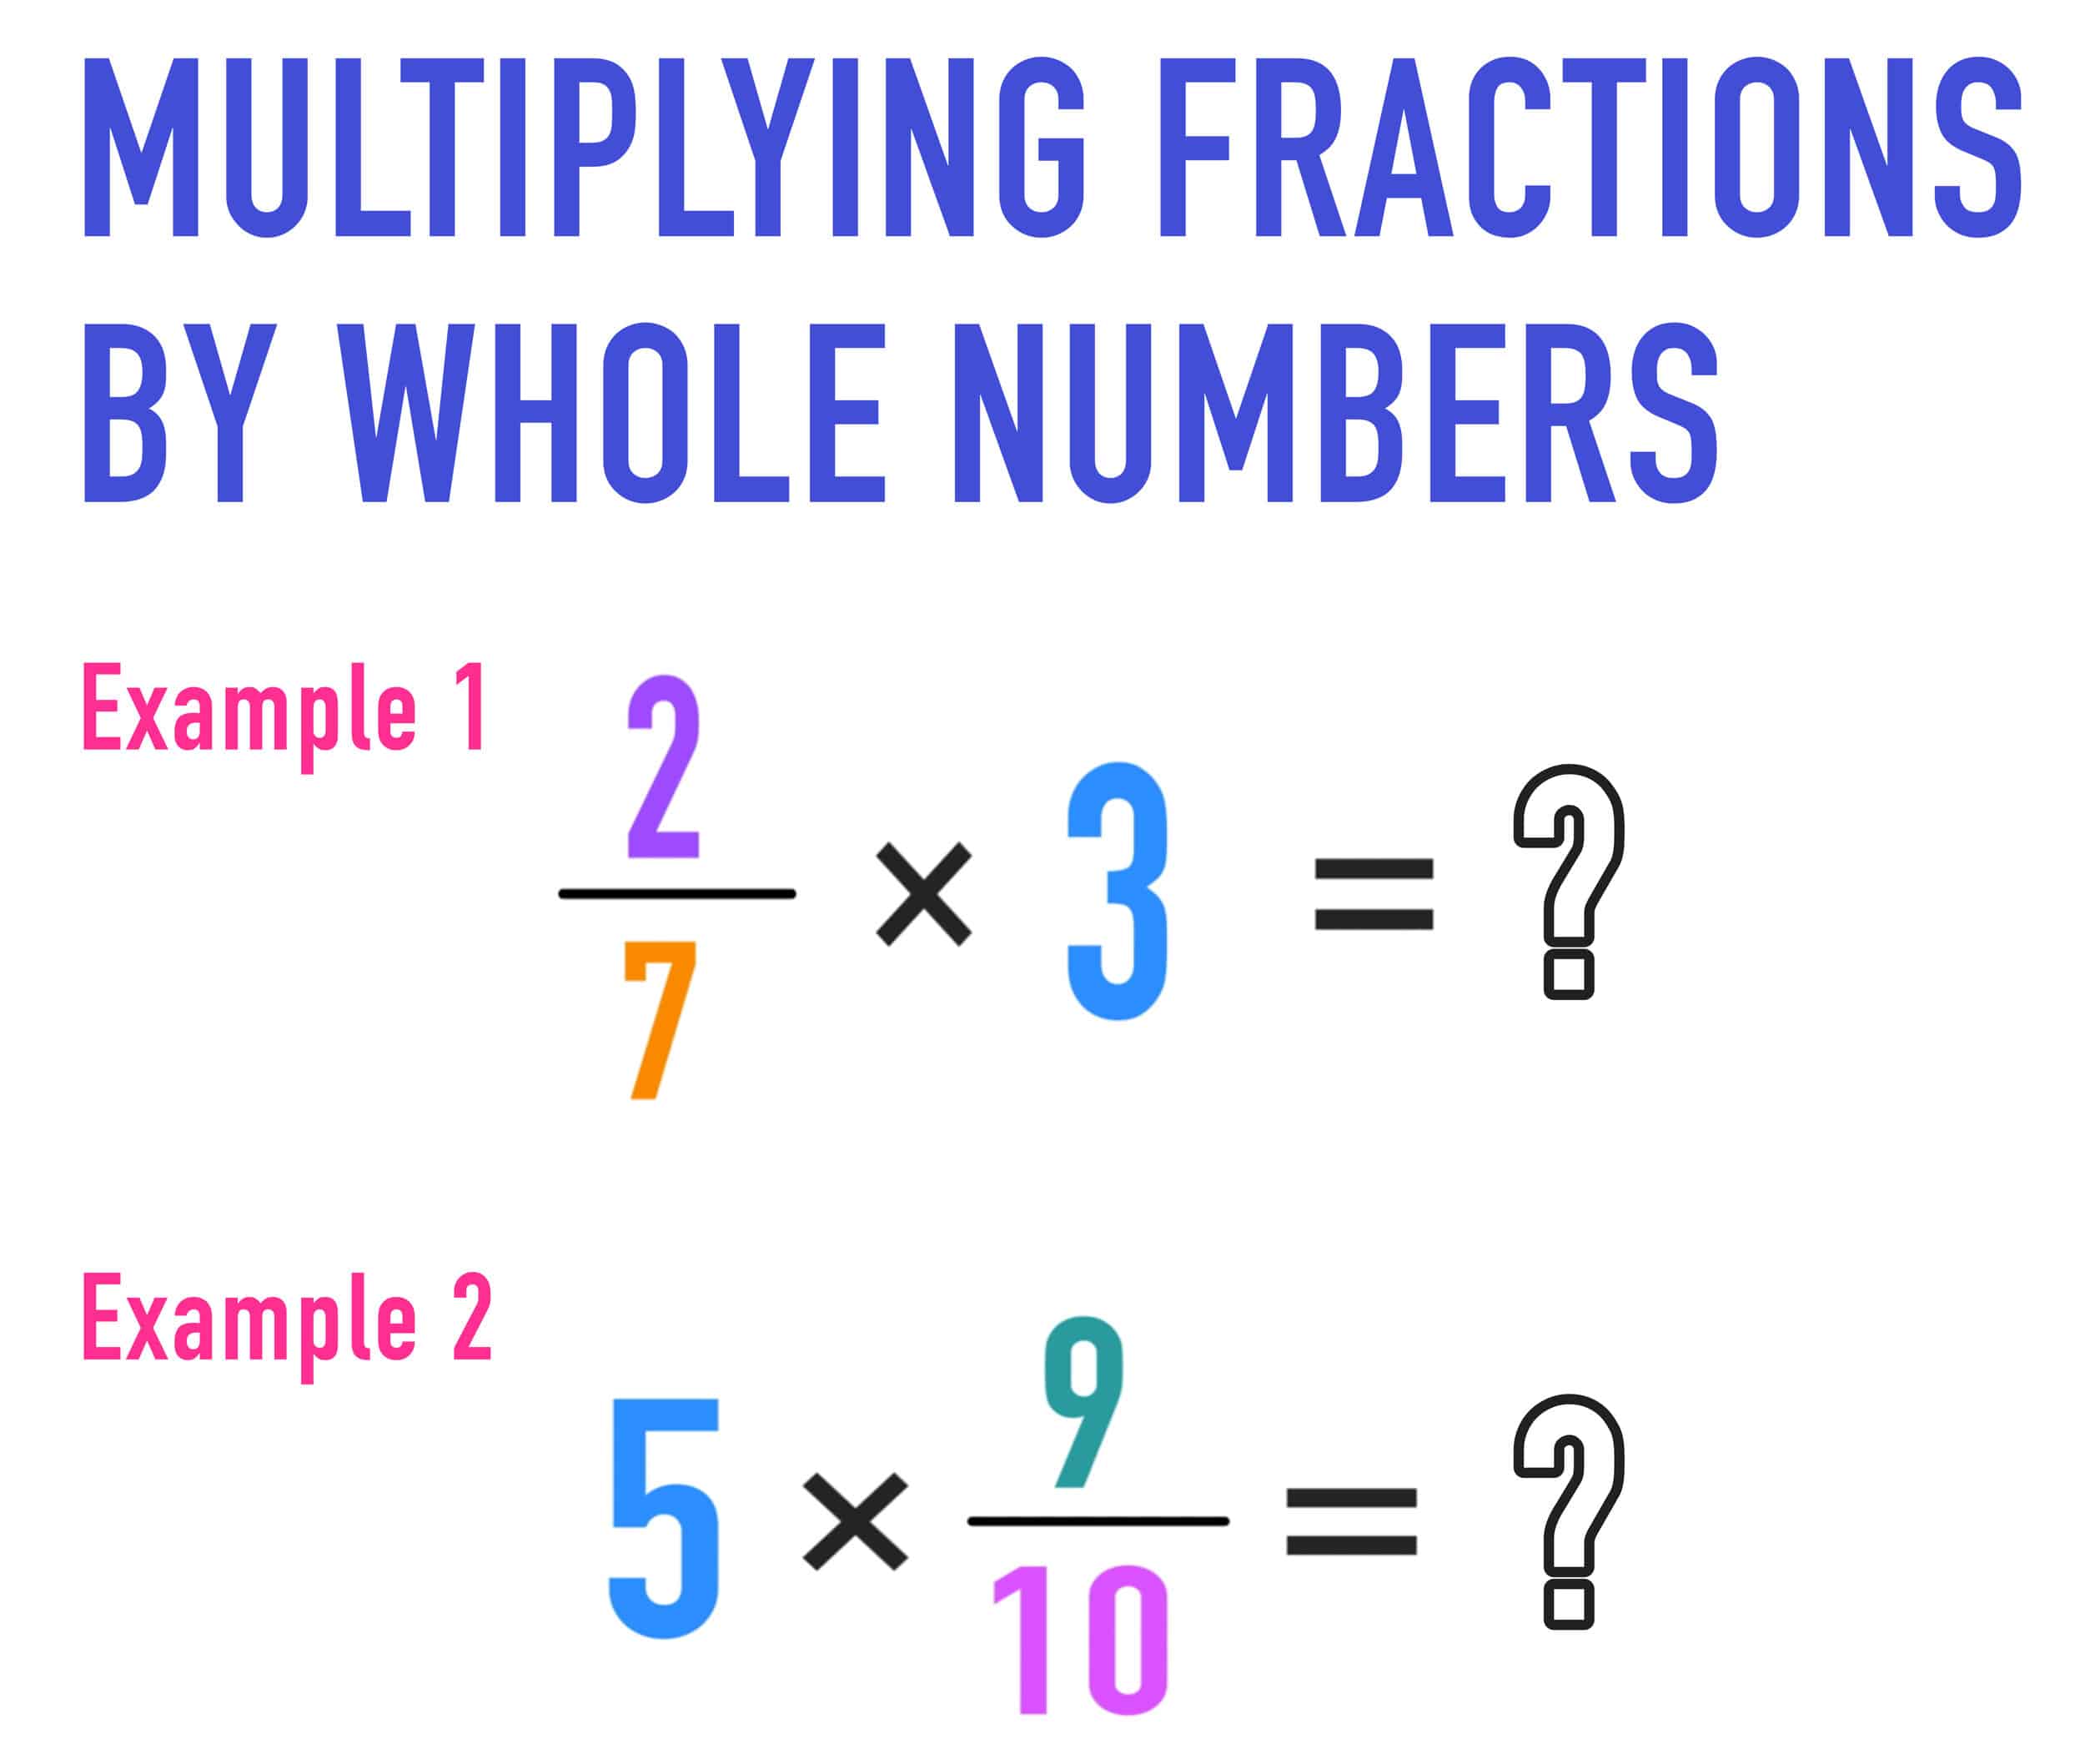 How to Multiply Fractions with Whole Numbers